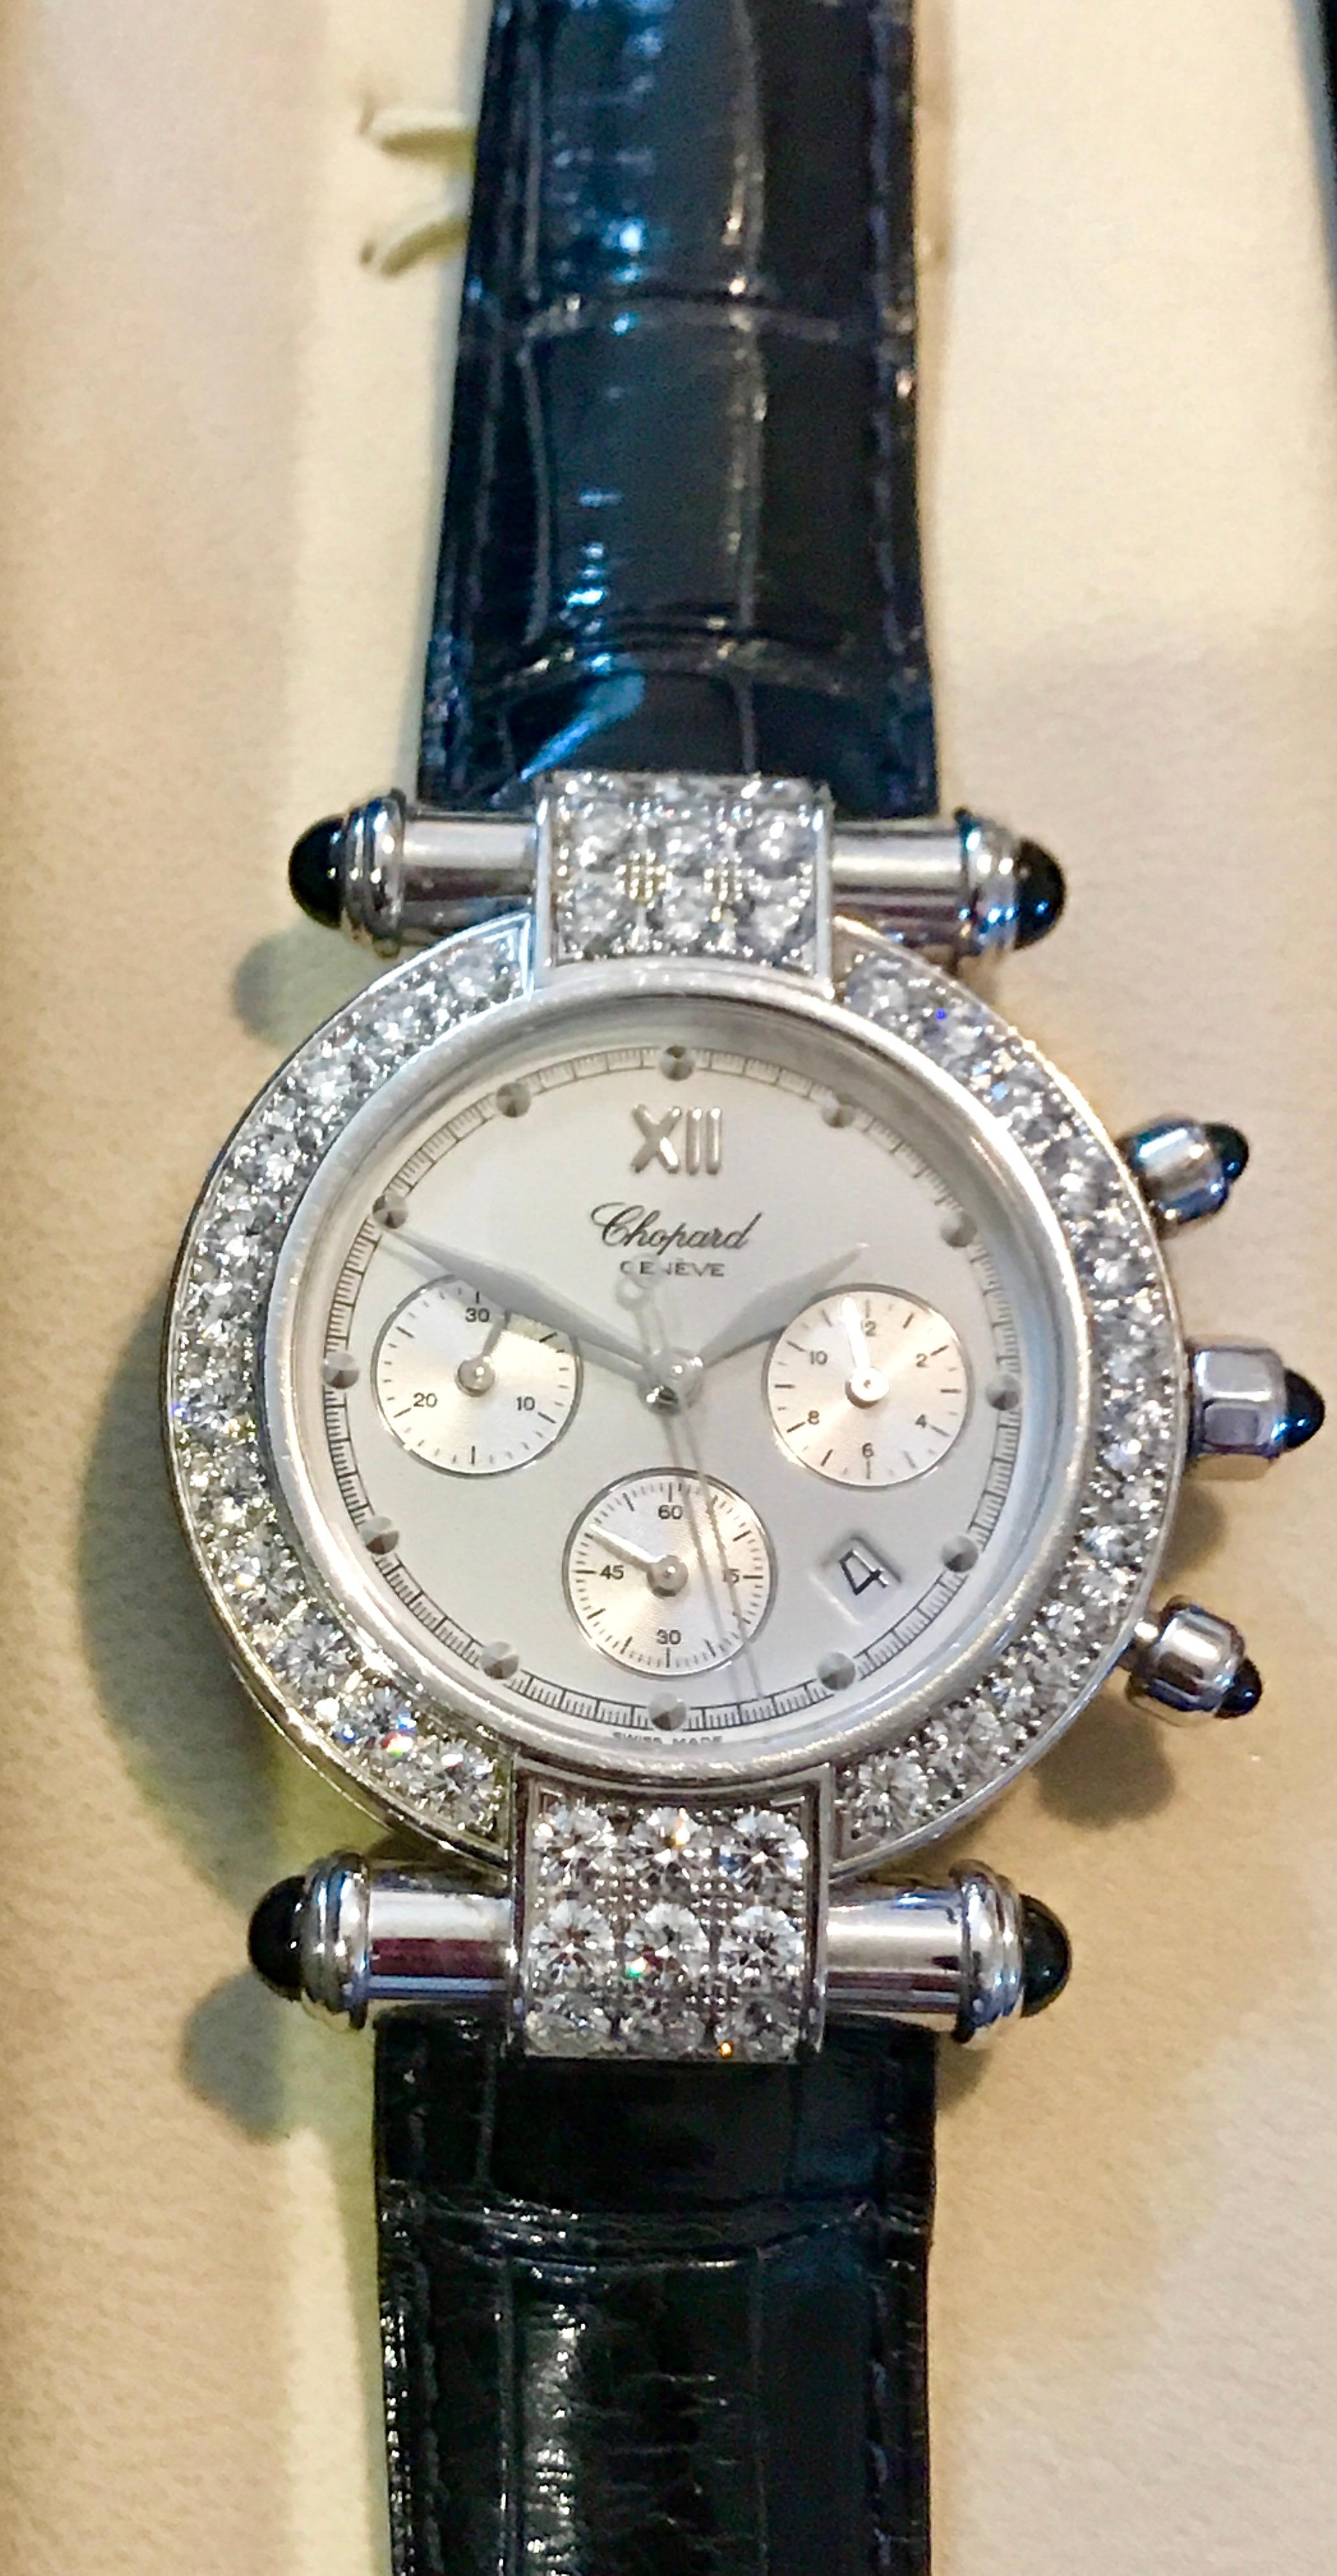 Chopard  2004
Imperiale Chronograph with Diamond Bezel
18 Karat White Gold on Black Leather Strap 
Case:	18 Karat White Gold
Case Size:	37mm
Movement:	Quartz
Bracelet:	Black Leather Strap
Model # 136940
* Pre-Owned (Used) with Box no Papers
This